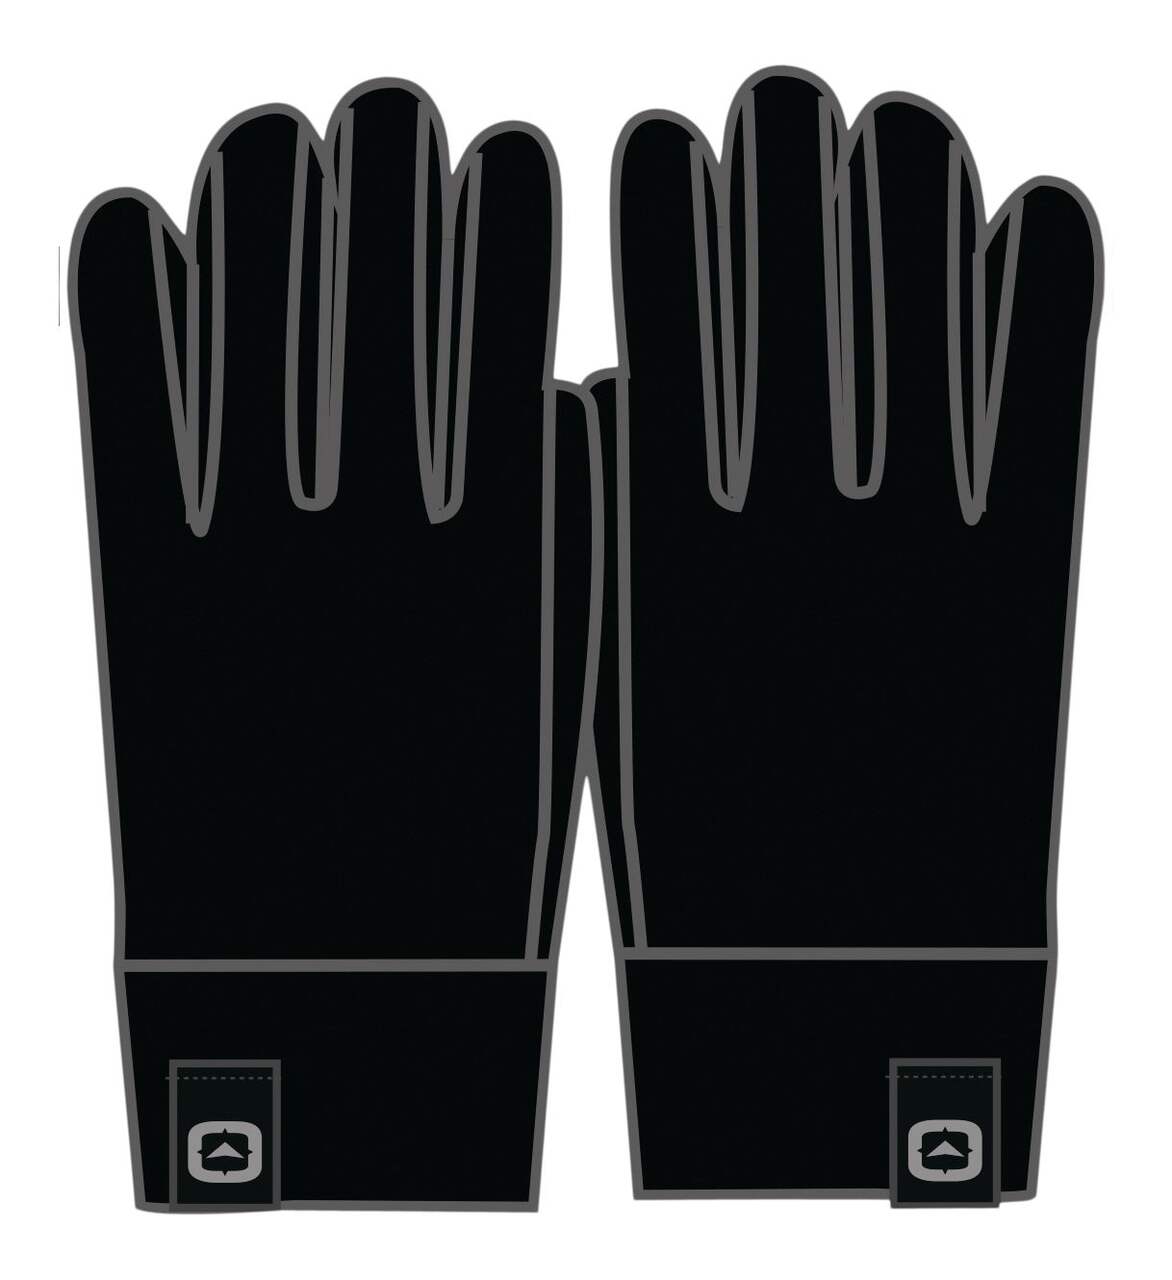 https://media-www.canadiantire.ca/product/playing/footwear-apparel/winter-footwear-apparel/1873015/men-s-outbound-tech-glove-black-grey-s-m-4a0b2257-5908-46ce-9d16-f11e6f579395-jpgrendition.jpg?imdensity=1&imwidth=1244&impolicy=mZoom